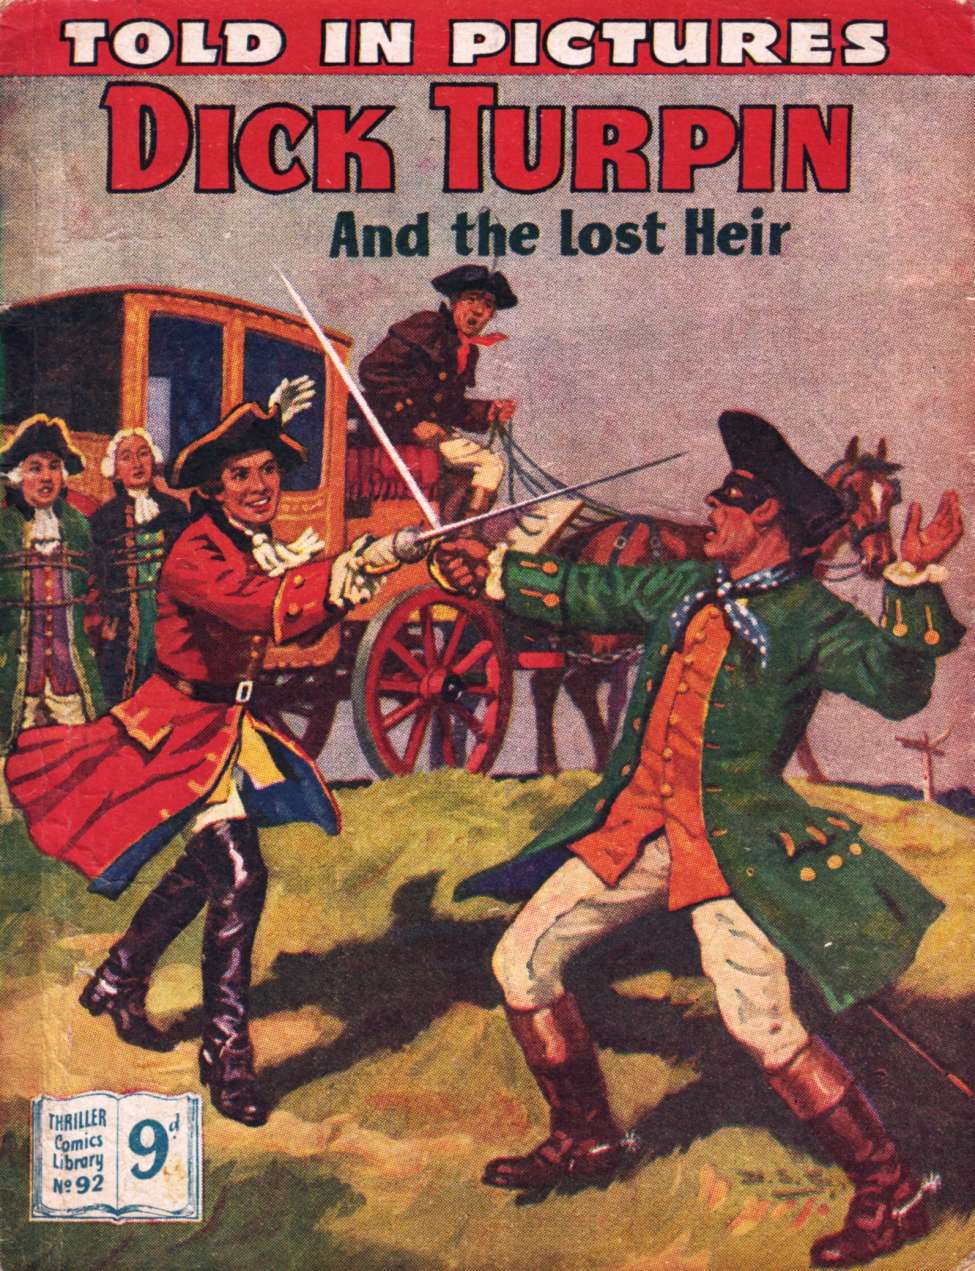 Book Cover For Thriller Comics Library 92 - Dick Turpin and the Lost Heir